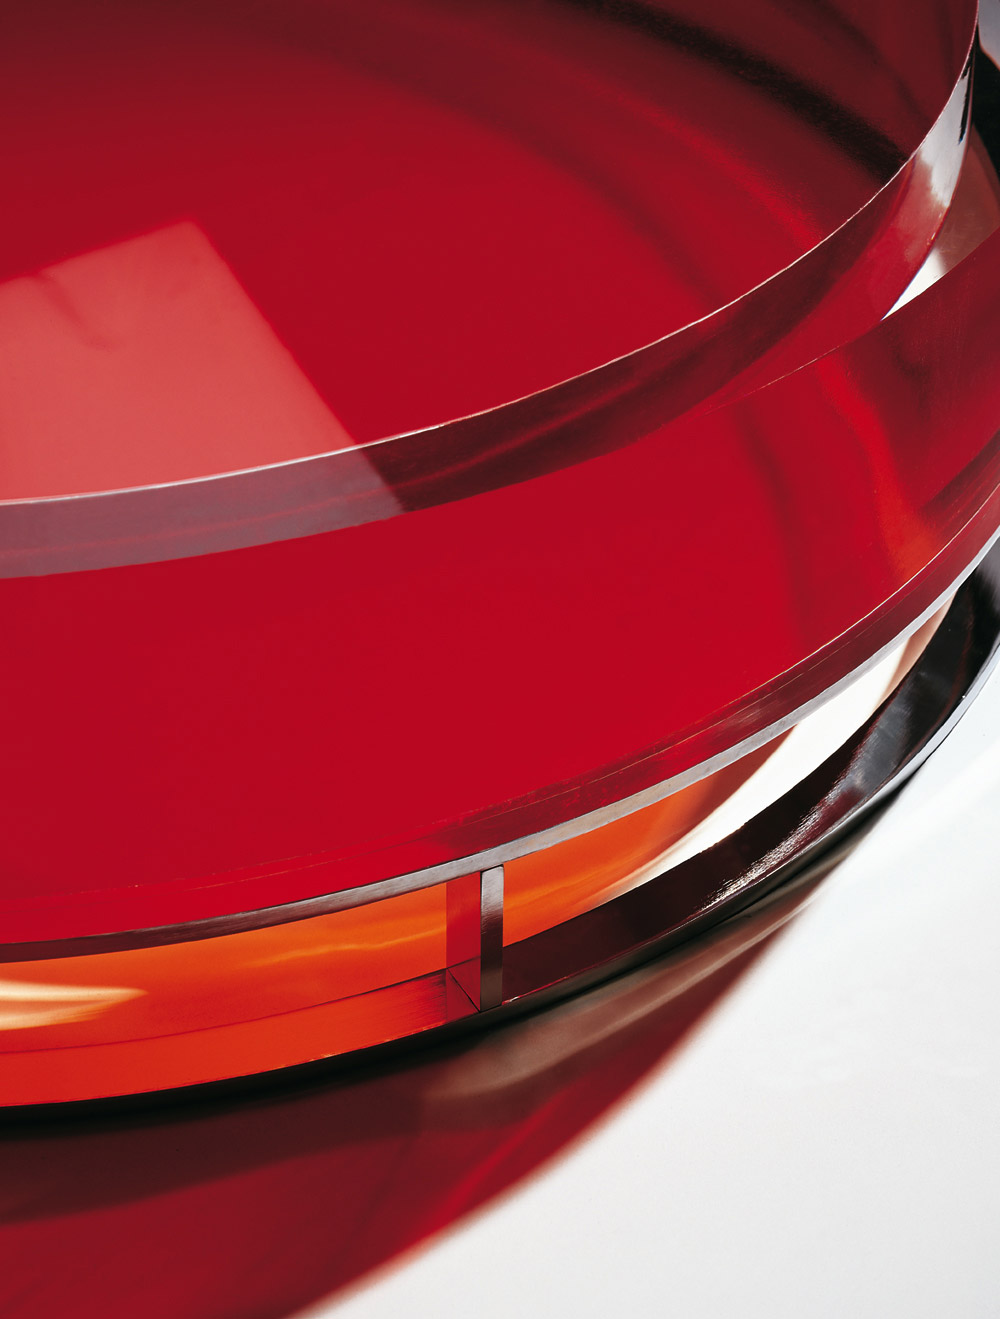 Custom furniture design luxury home decor table pastille red glass table close up